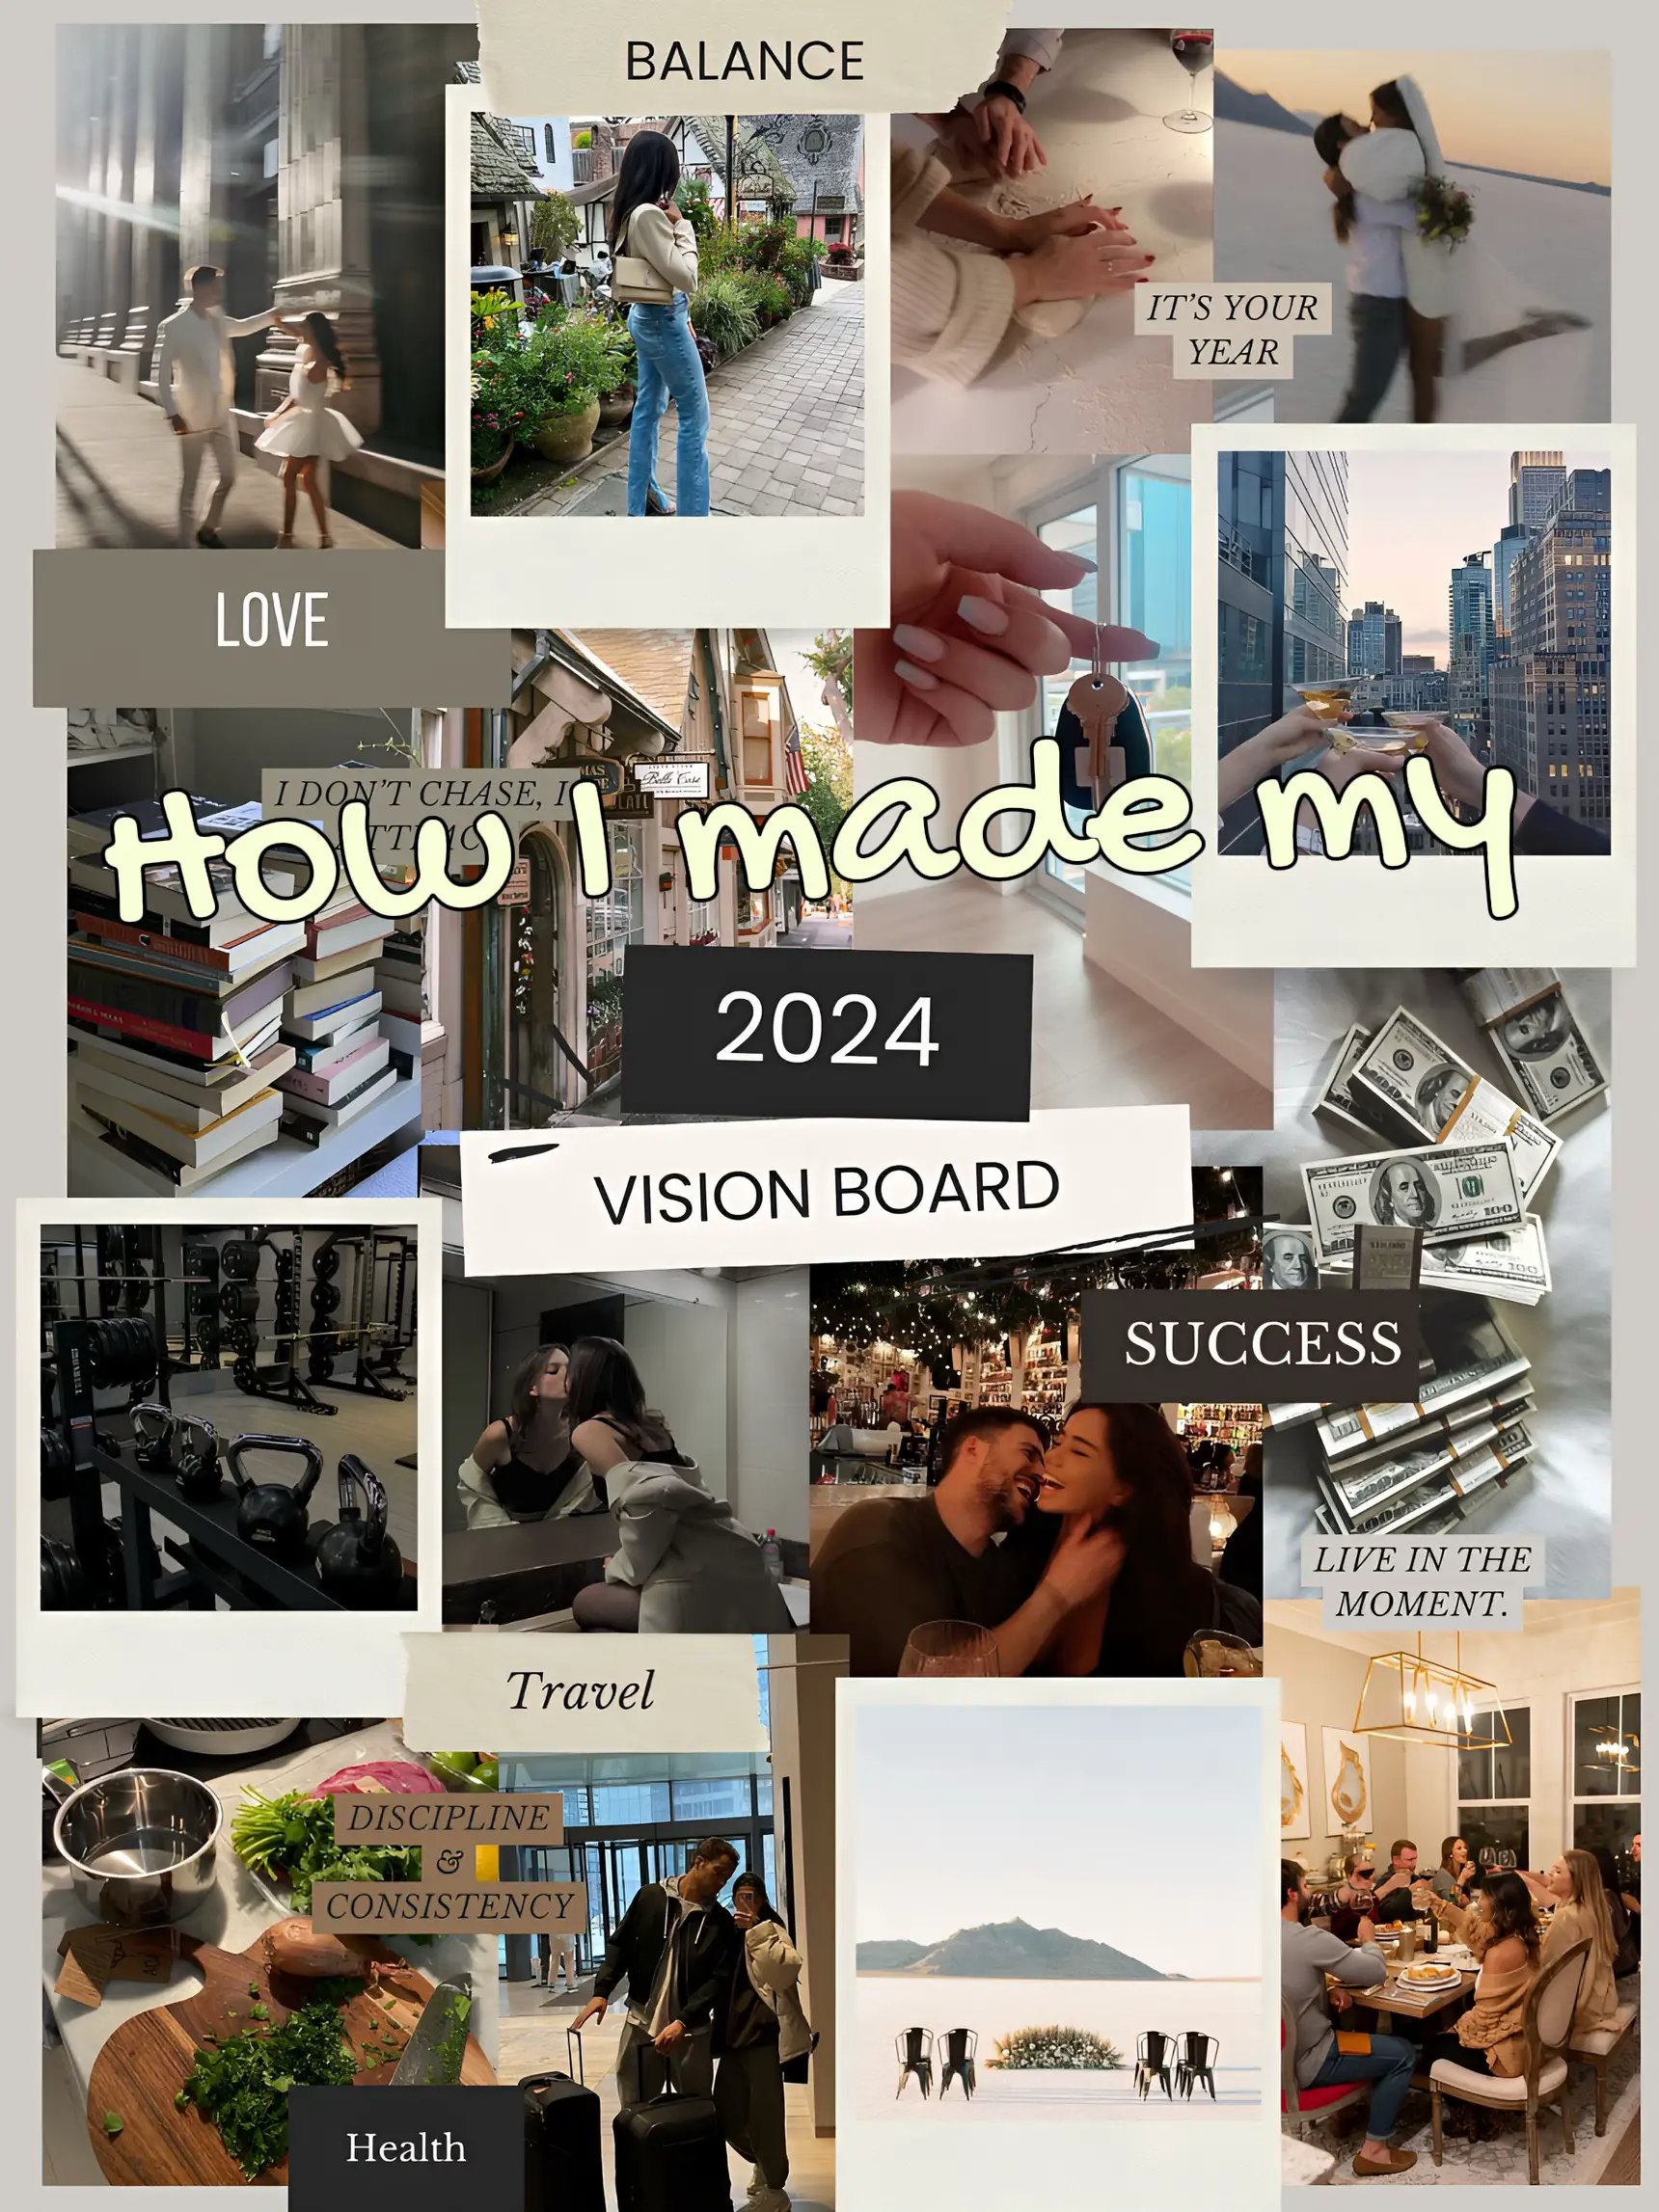 100+] Vision Board Wallpapers